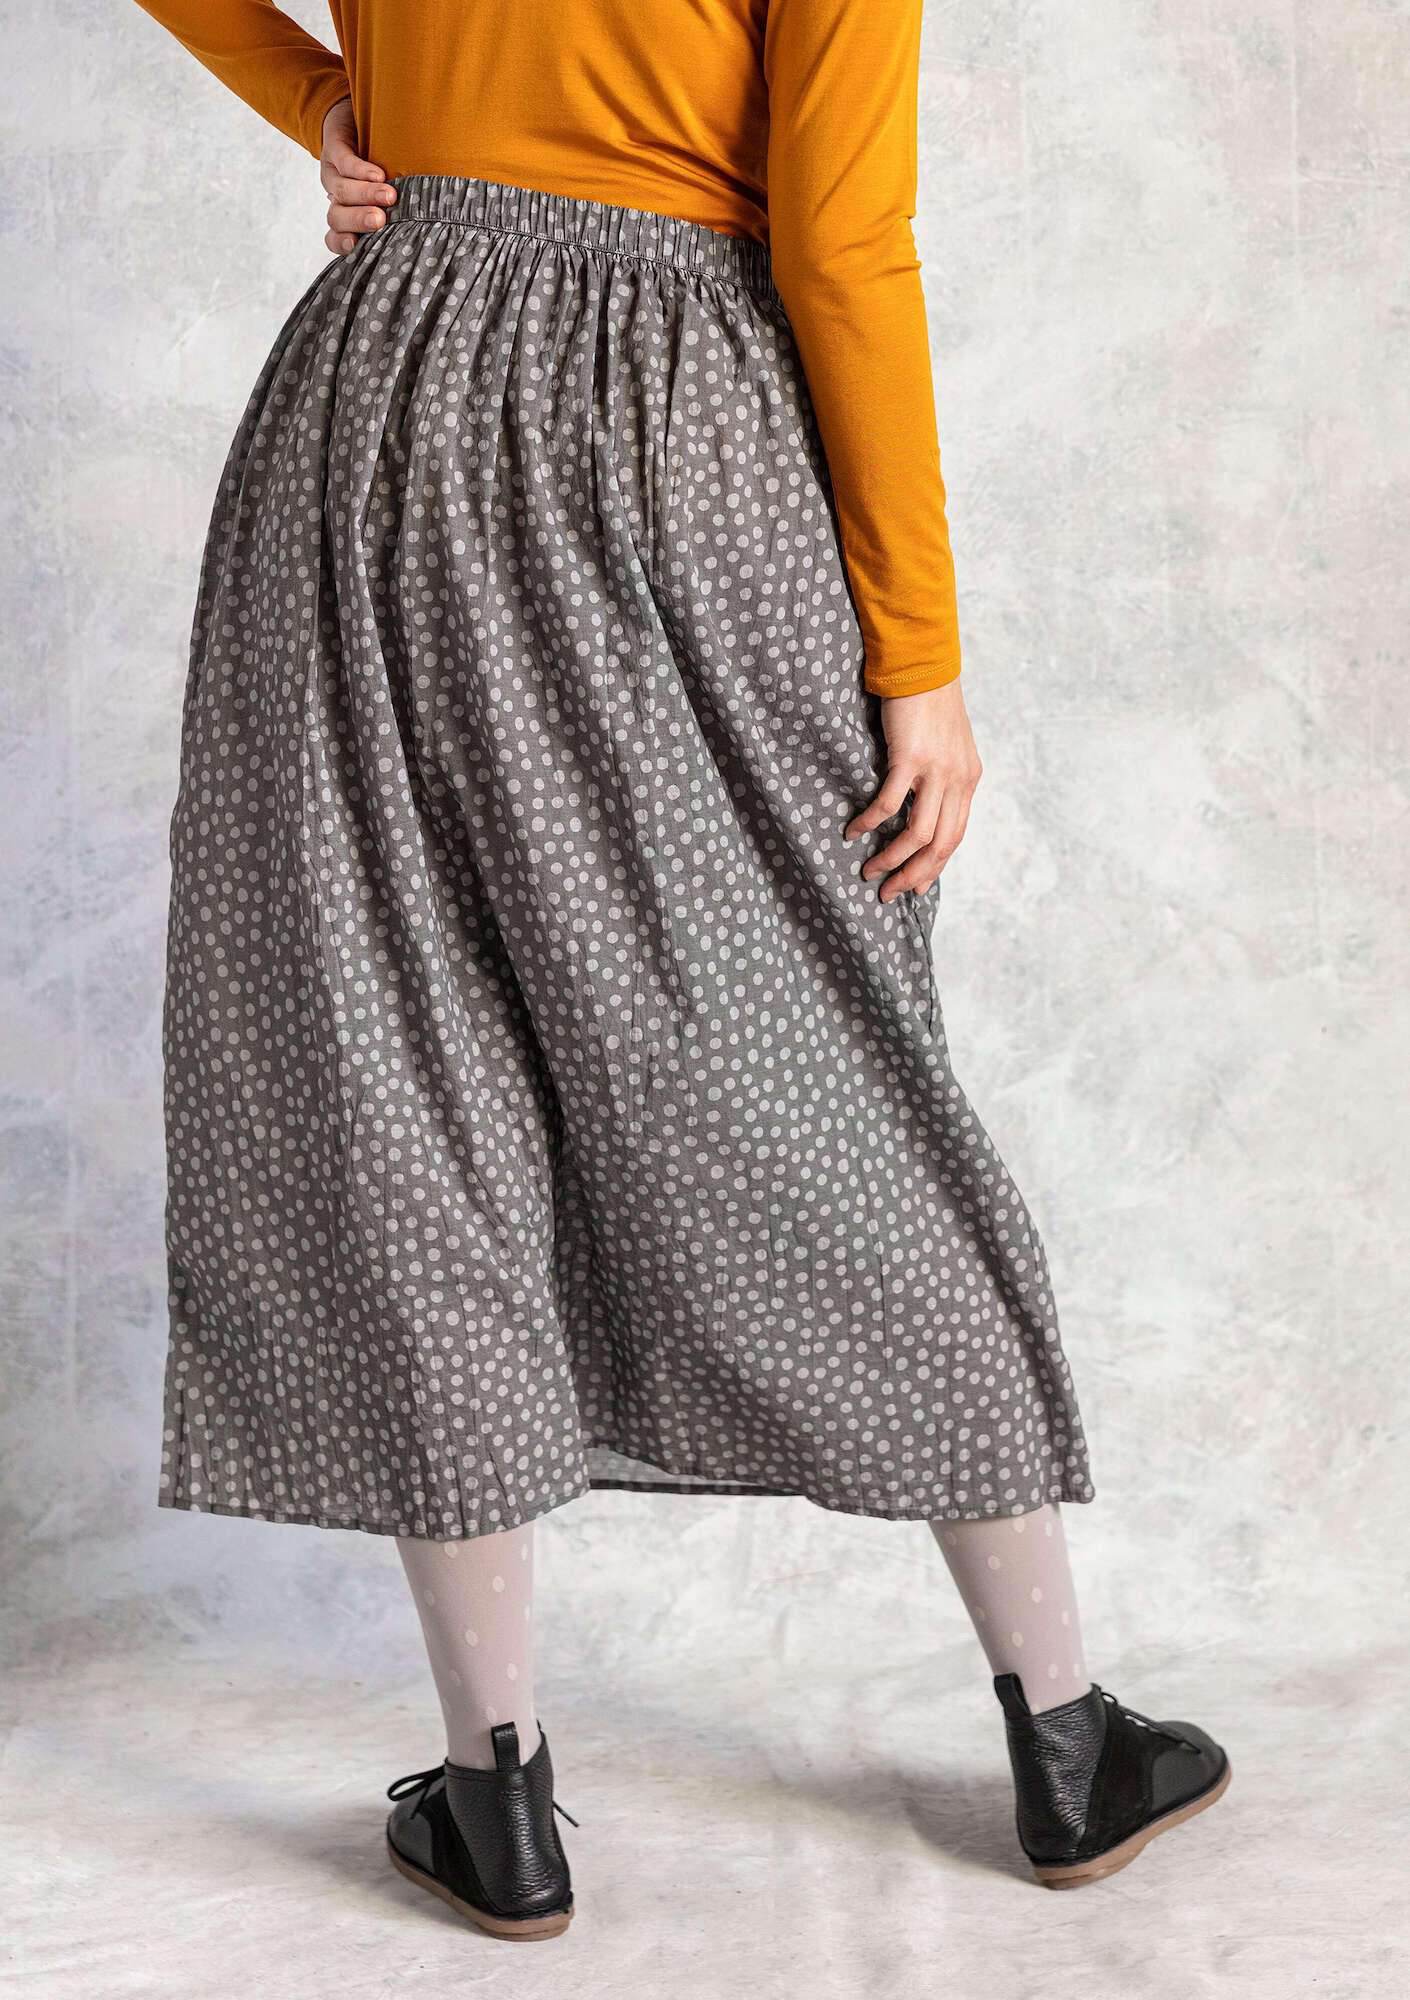 “Alice” woven skirt in organic cotton iron gray/patterned